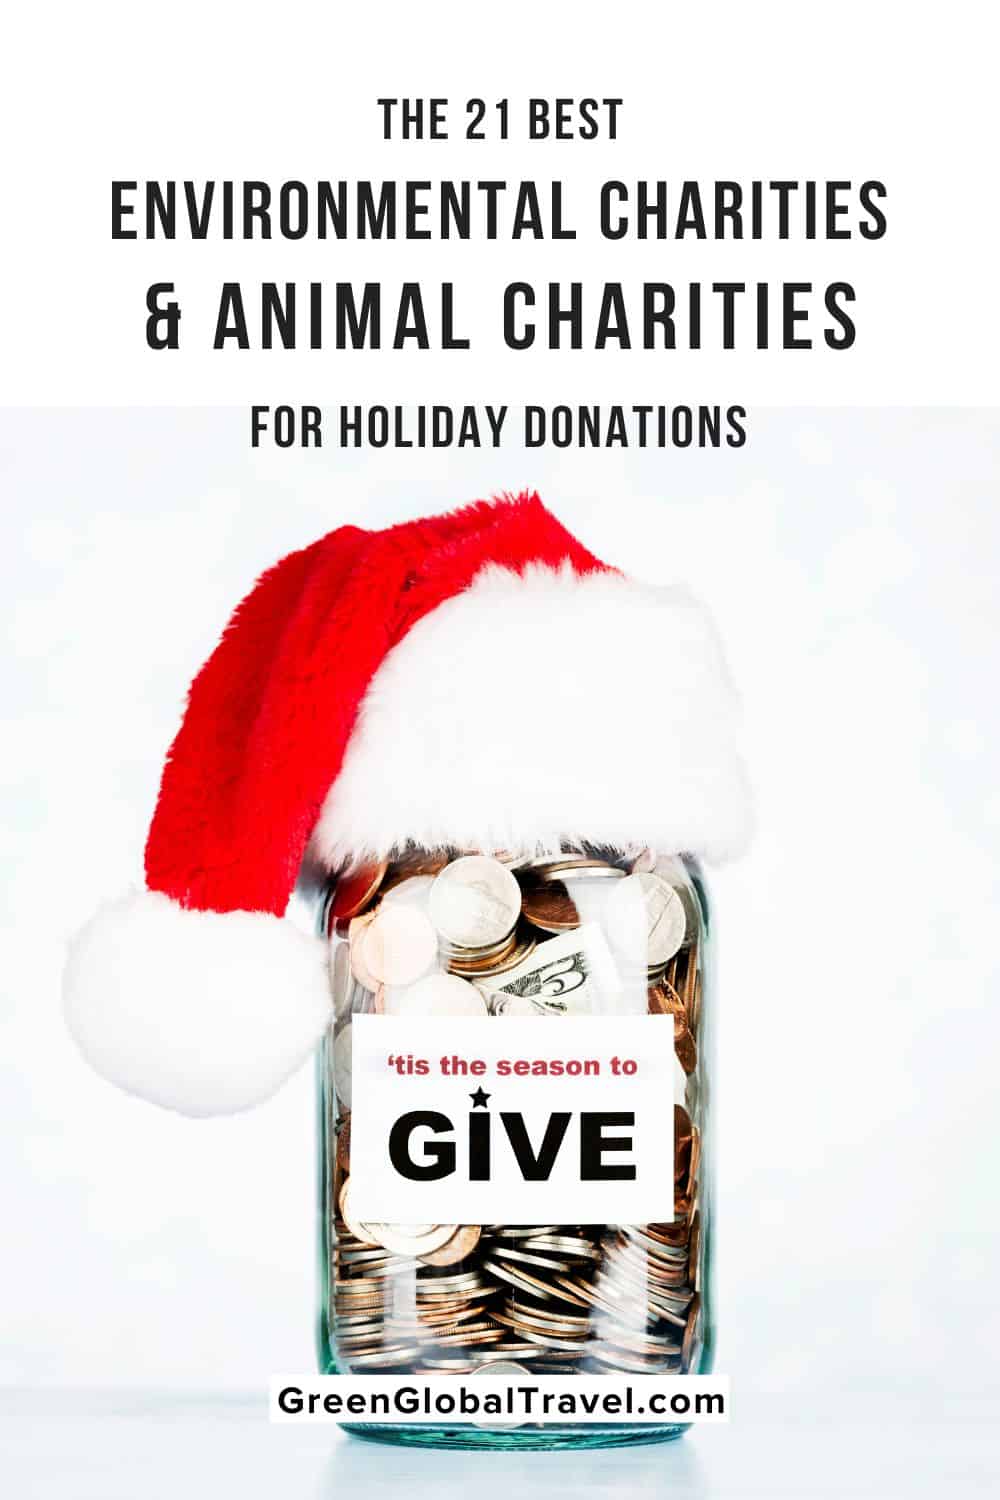 The 21 Best Environmental Charities for Holiday Donations, including ratings from Charity Watch & Charity Navigator. | animal charities animal donations | charities for animals | wildlife charities | best animal charities | best animal charity | animal charities to donate to | charities animals | charity for animals | environmental charities | best environmental charities | climate change charities | best climate change charities | nature charities | sustainability charities |